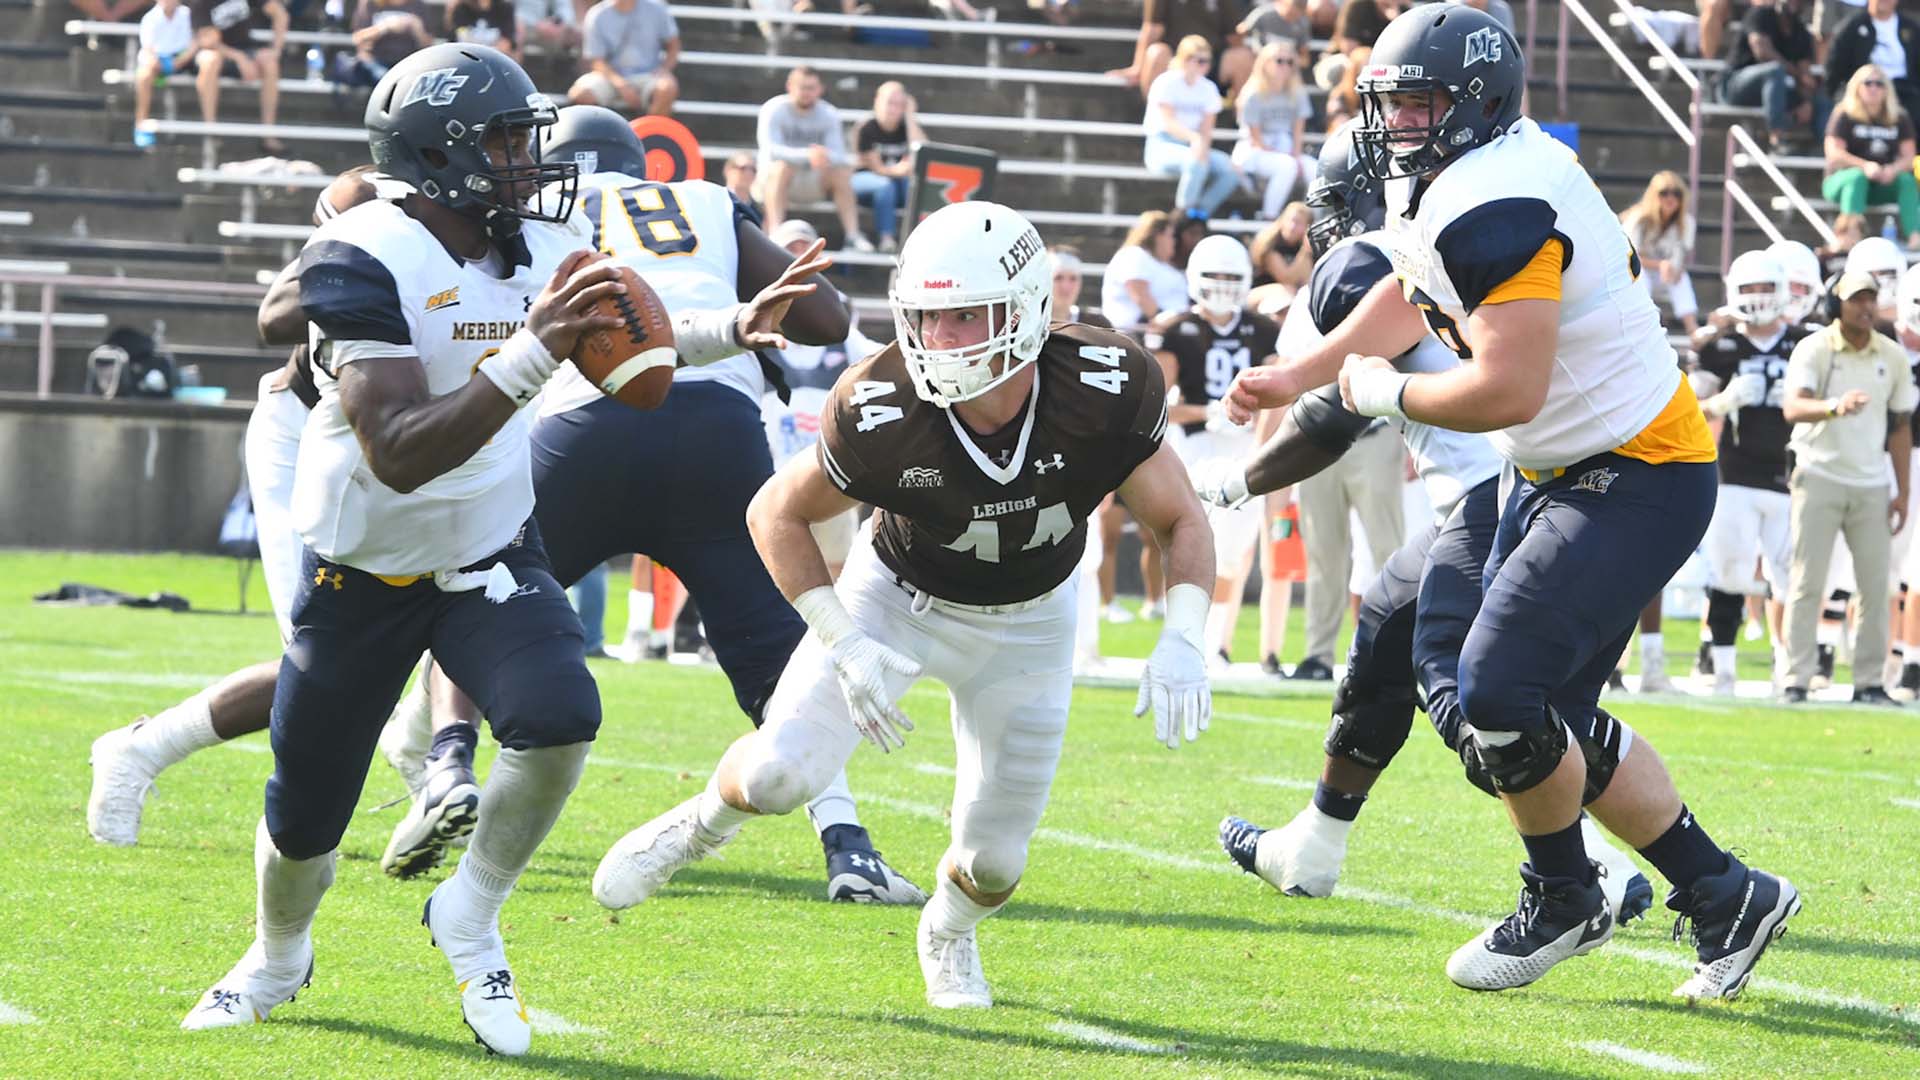 LEHIGH AT MERRIMACK 9/9/2023: Game Preview And Fearless Prediction: Mountain Hawks Head to Andover To Try To Spoil Warriors’ Home Opener